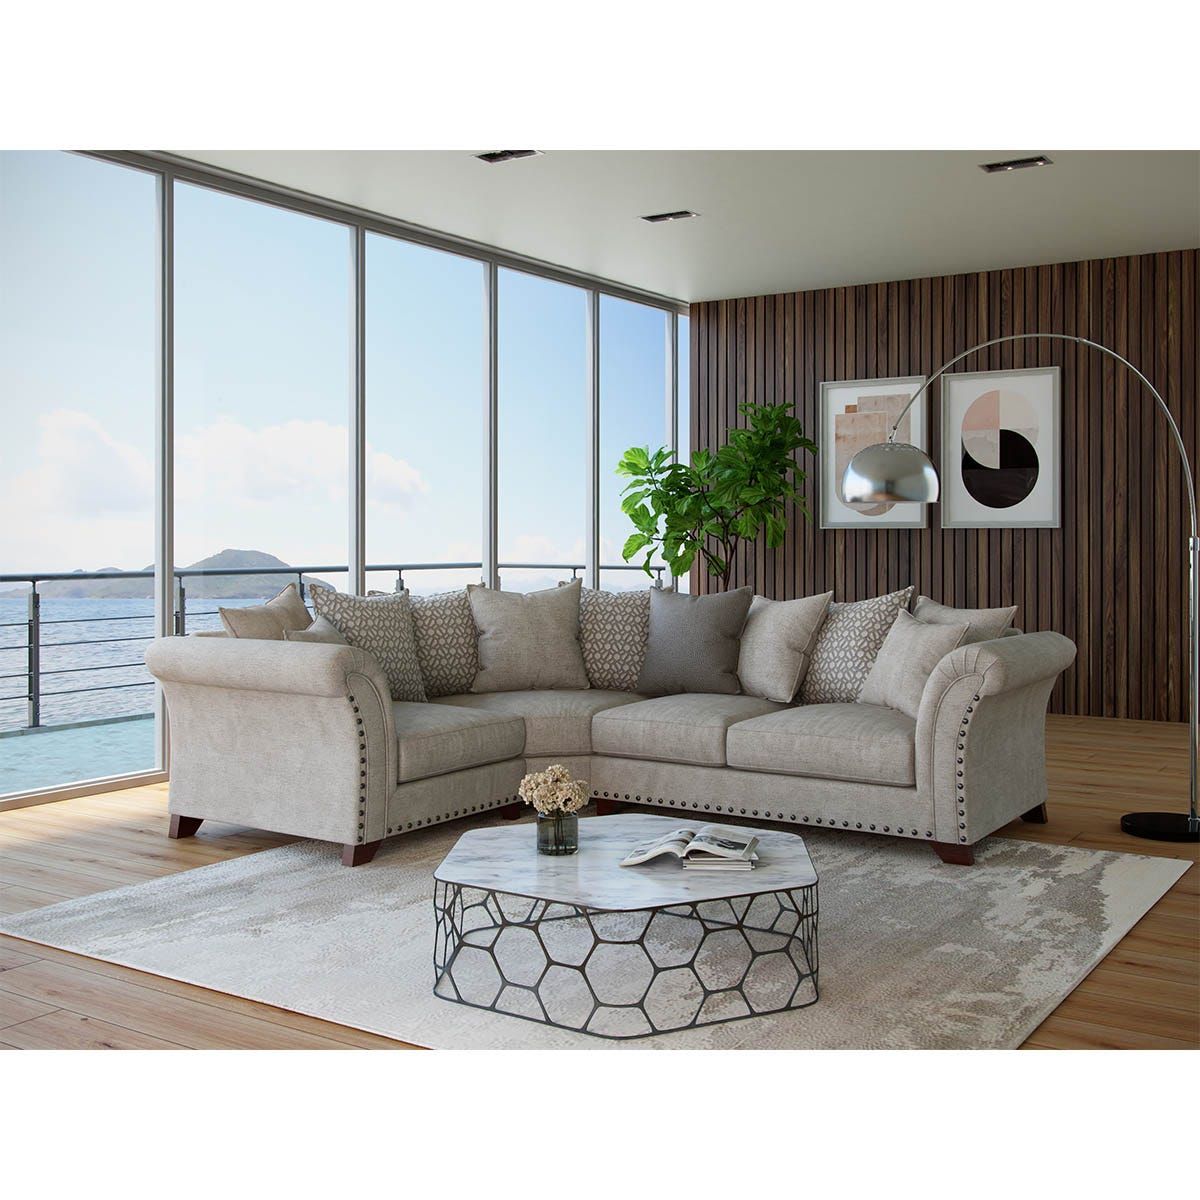 Chantelle 3 Seater And 2 Seater Sofa Set Silver Pillowback | Robert Dyas Within Pillowback Sofa Sectionals (View 7 of 15)